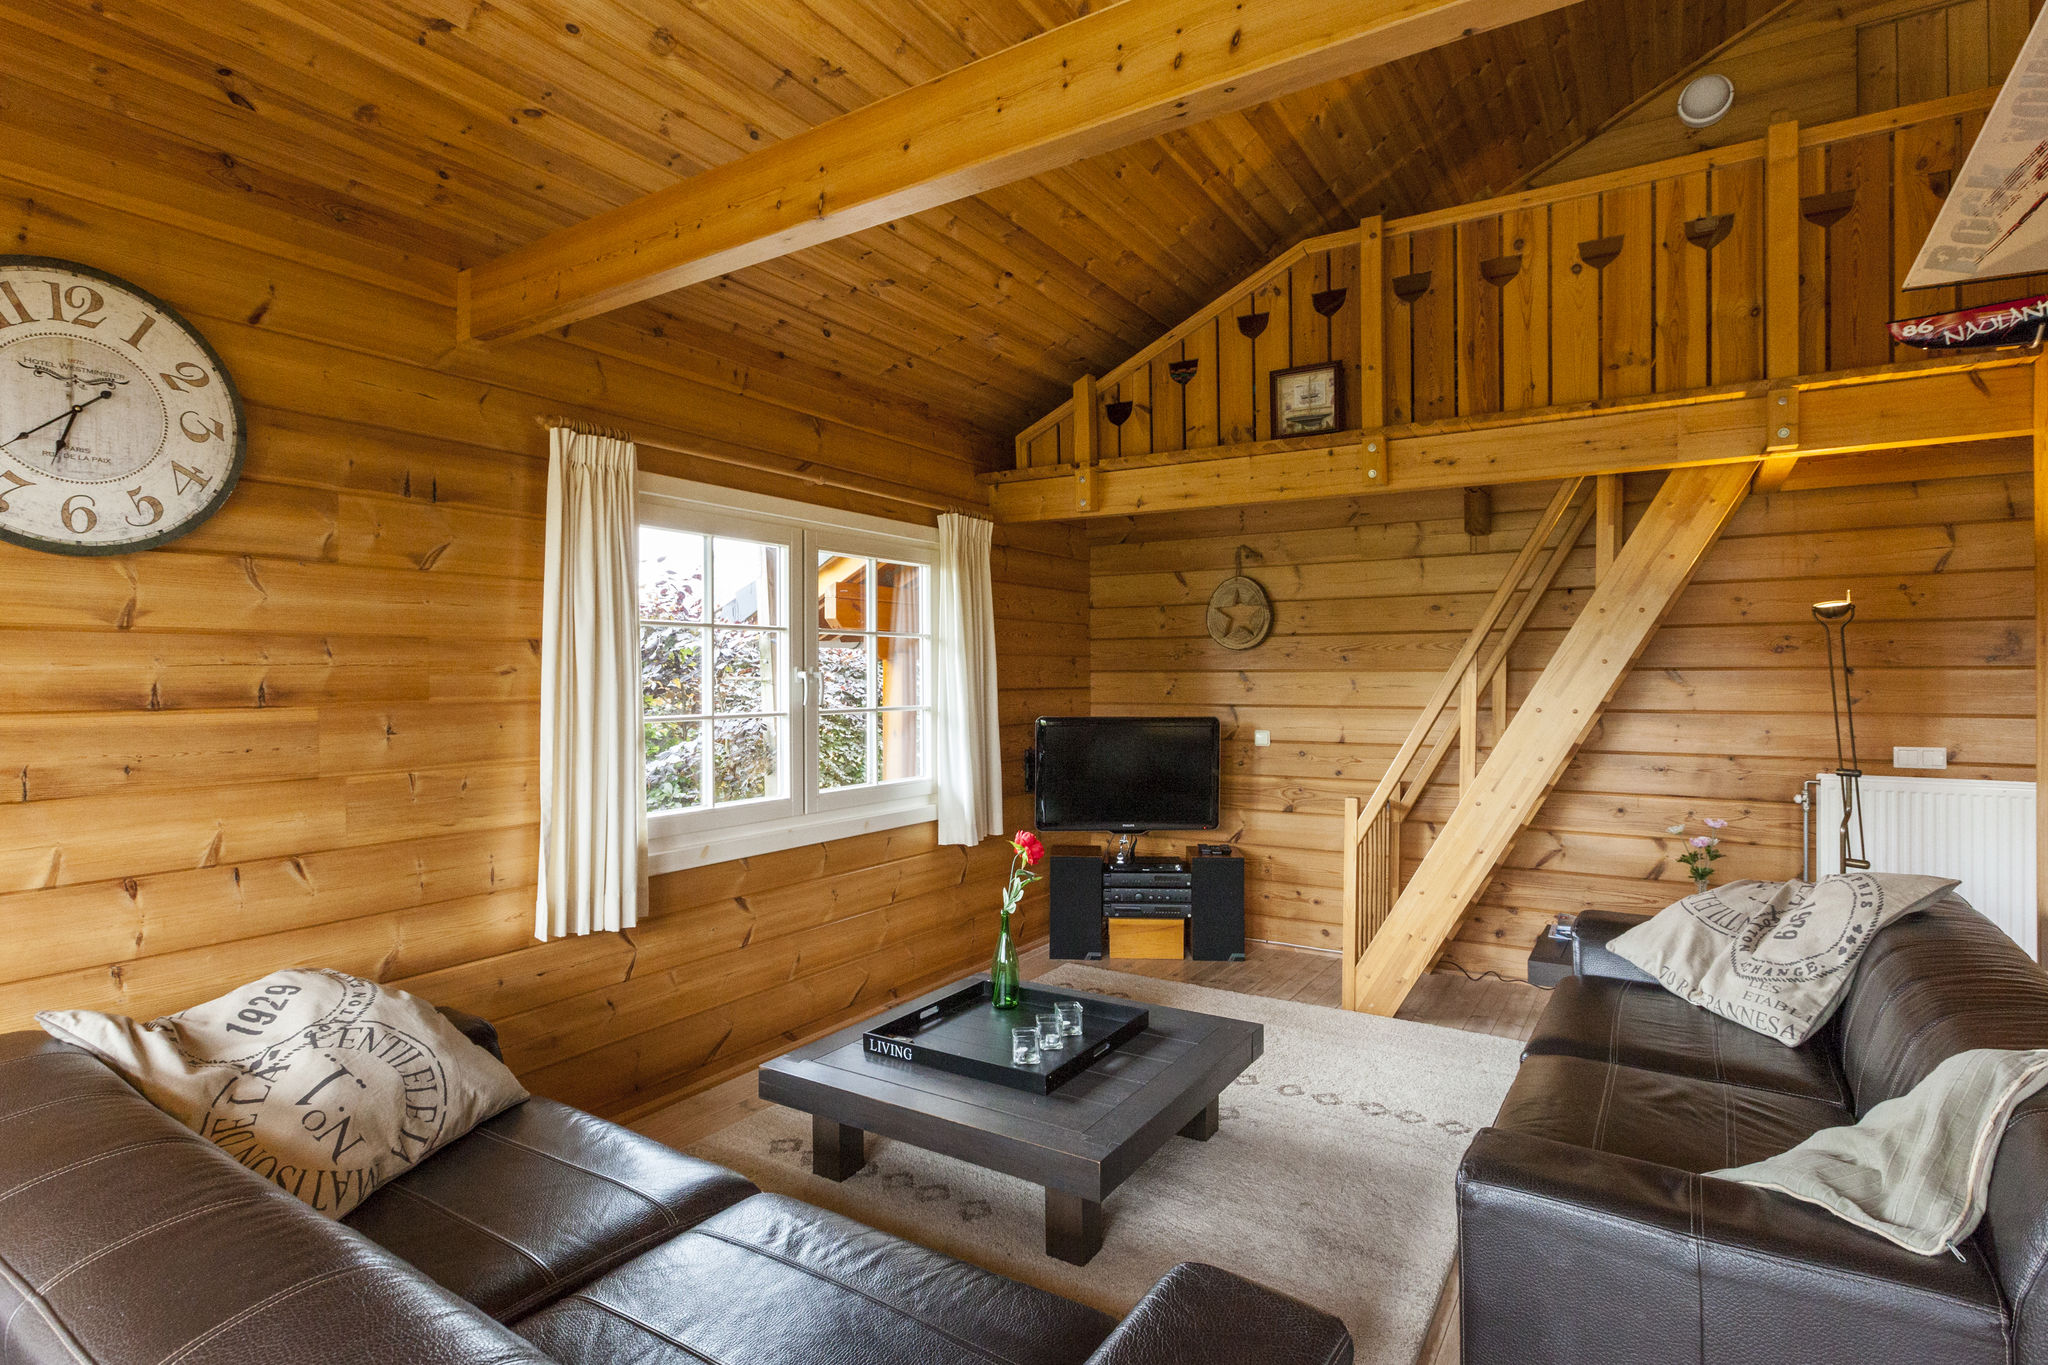 Cosy wooden chalet with private garden